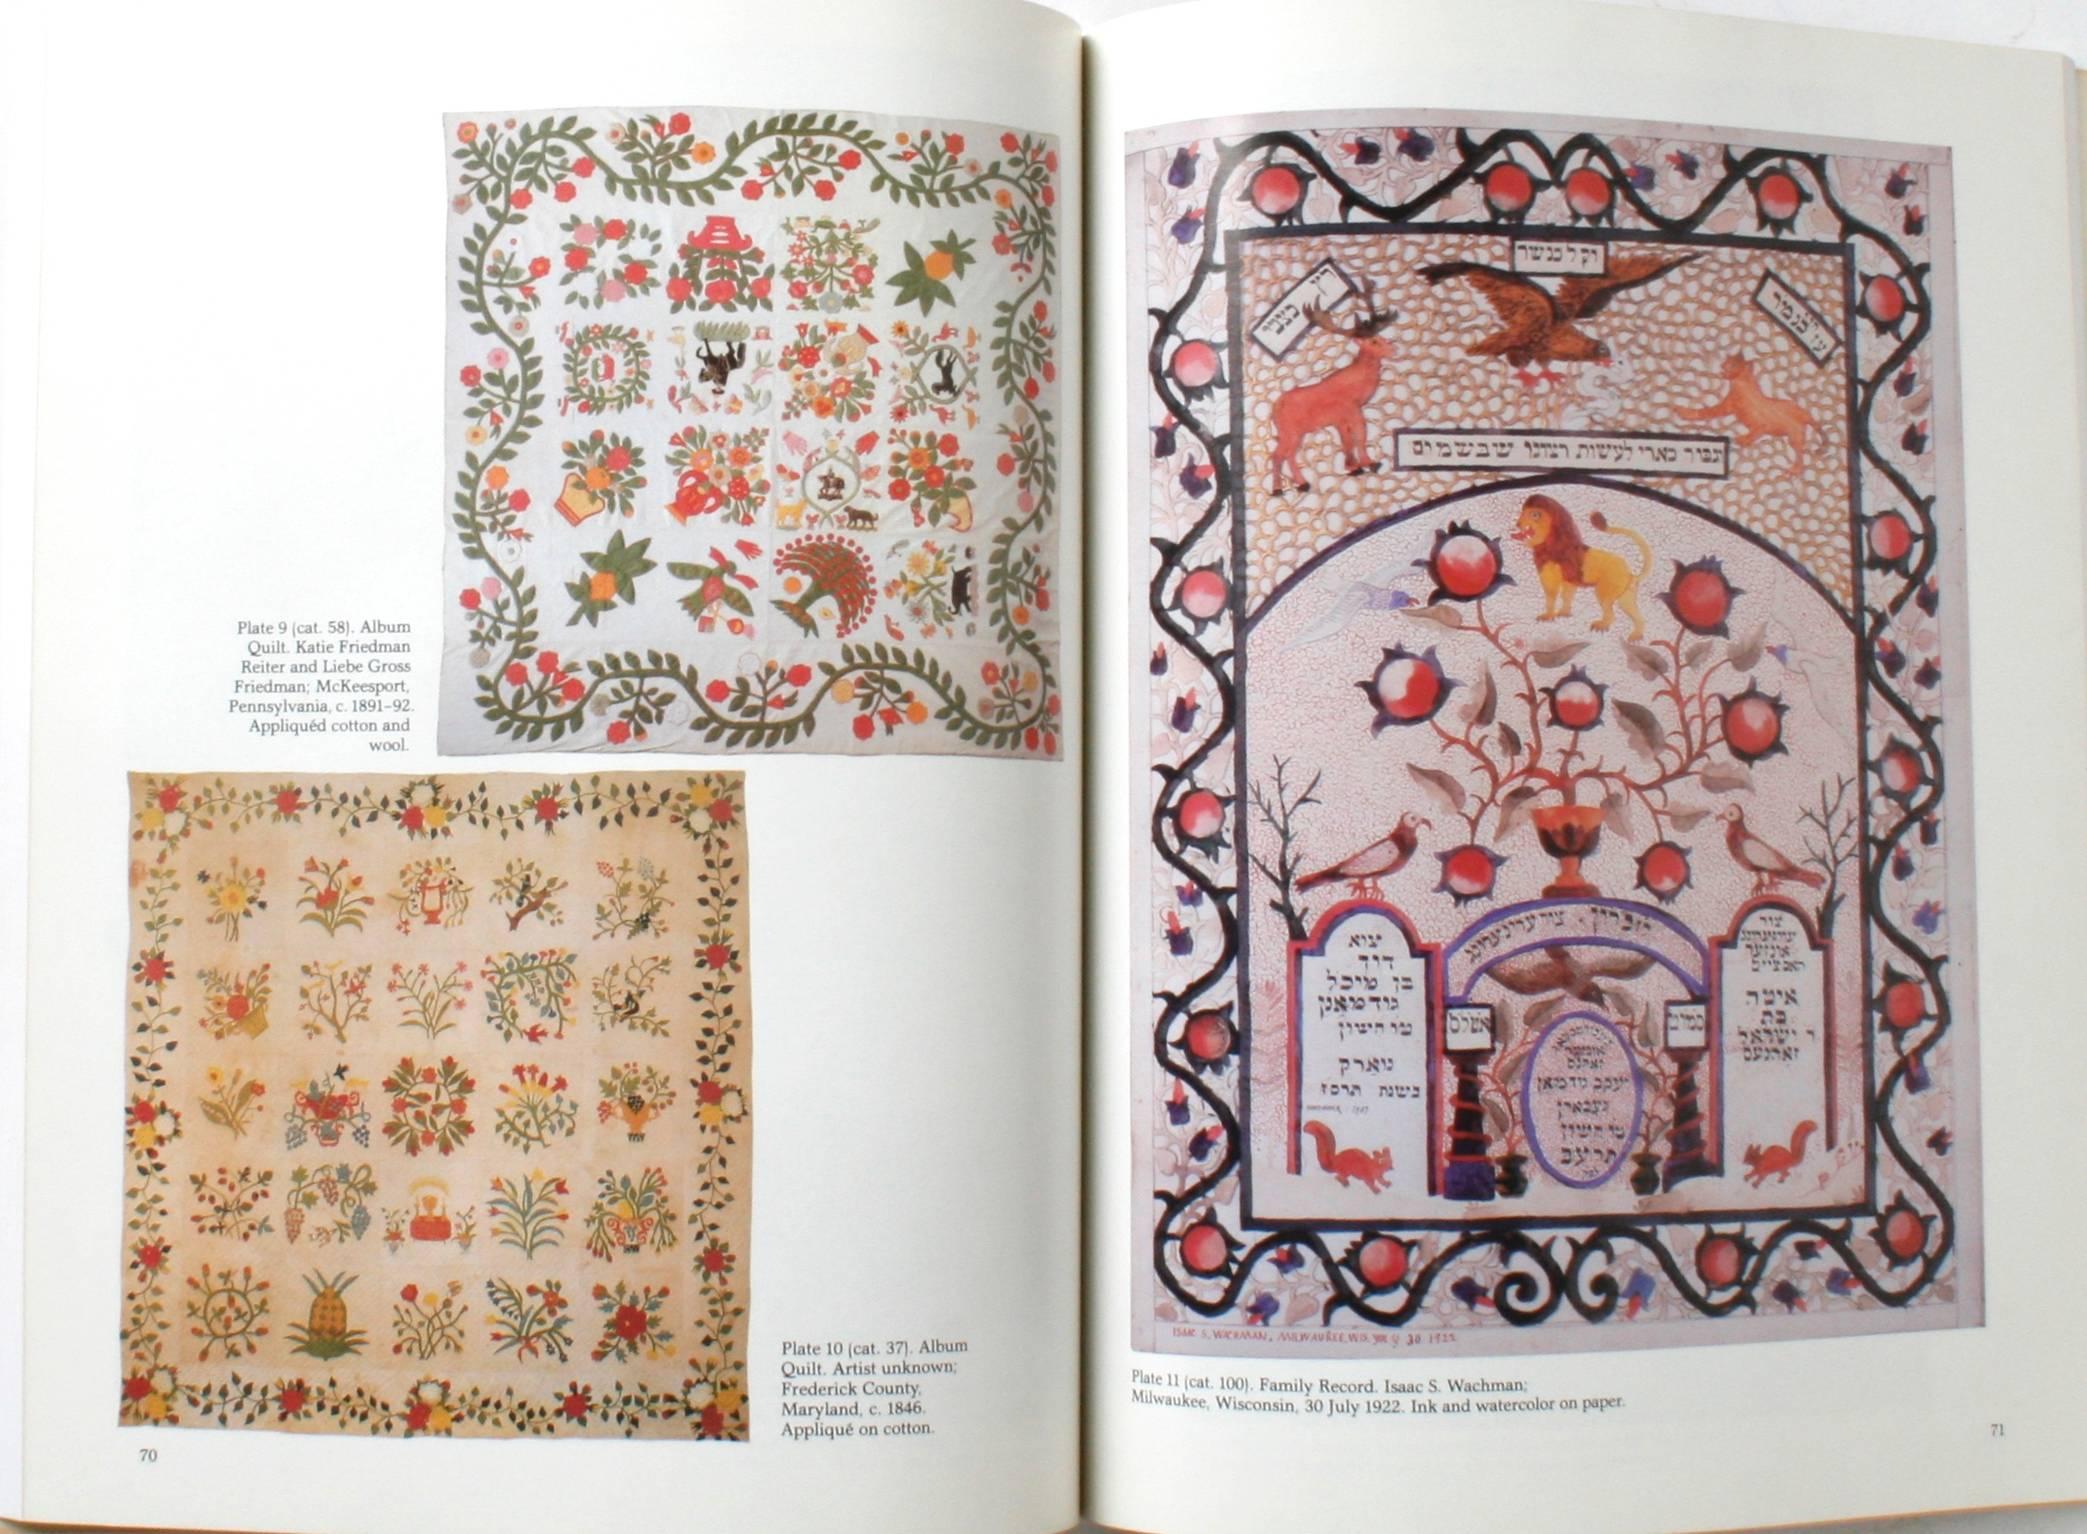 The Jewish Heritage in American Folk Art. New York: Universe Books, 1984. Softcover. 124 pp. A charming exhibition catalogue published by the Jewish Museum/New York on Jewish American Folk Art. The catalogue include sections on aspects of American